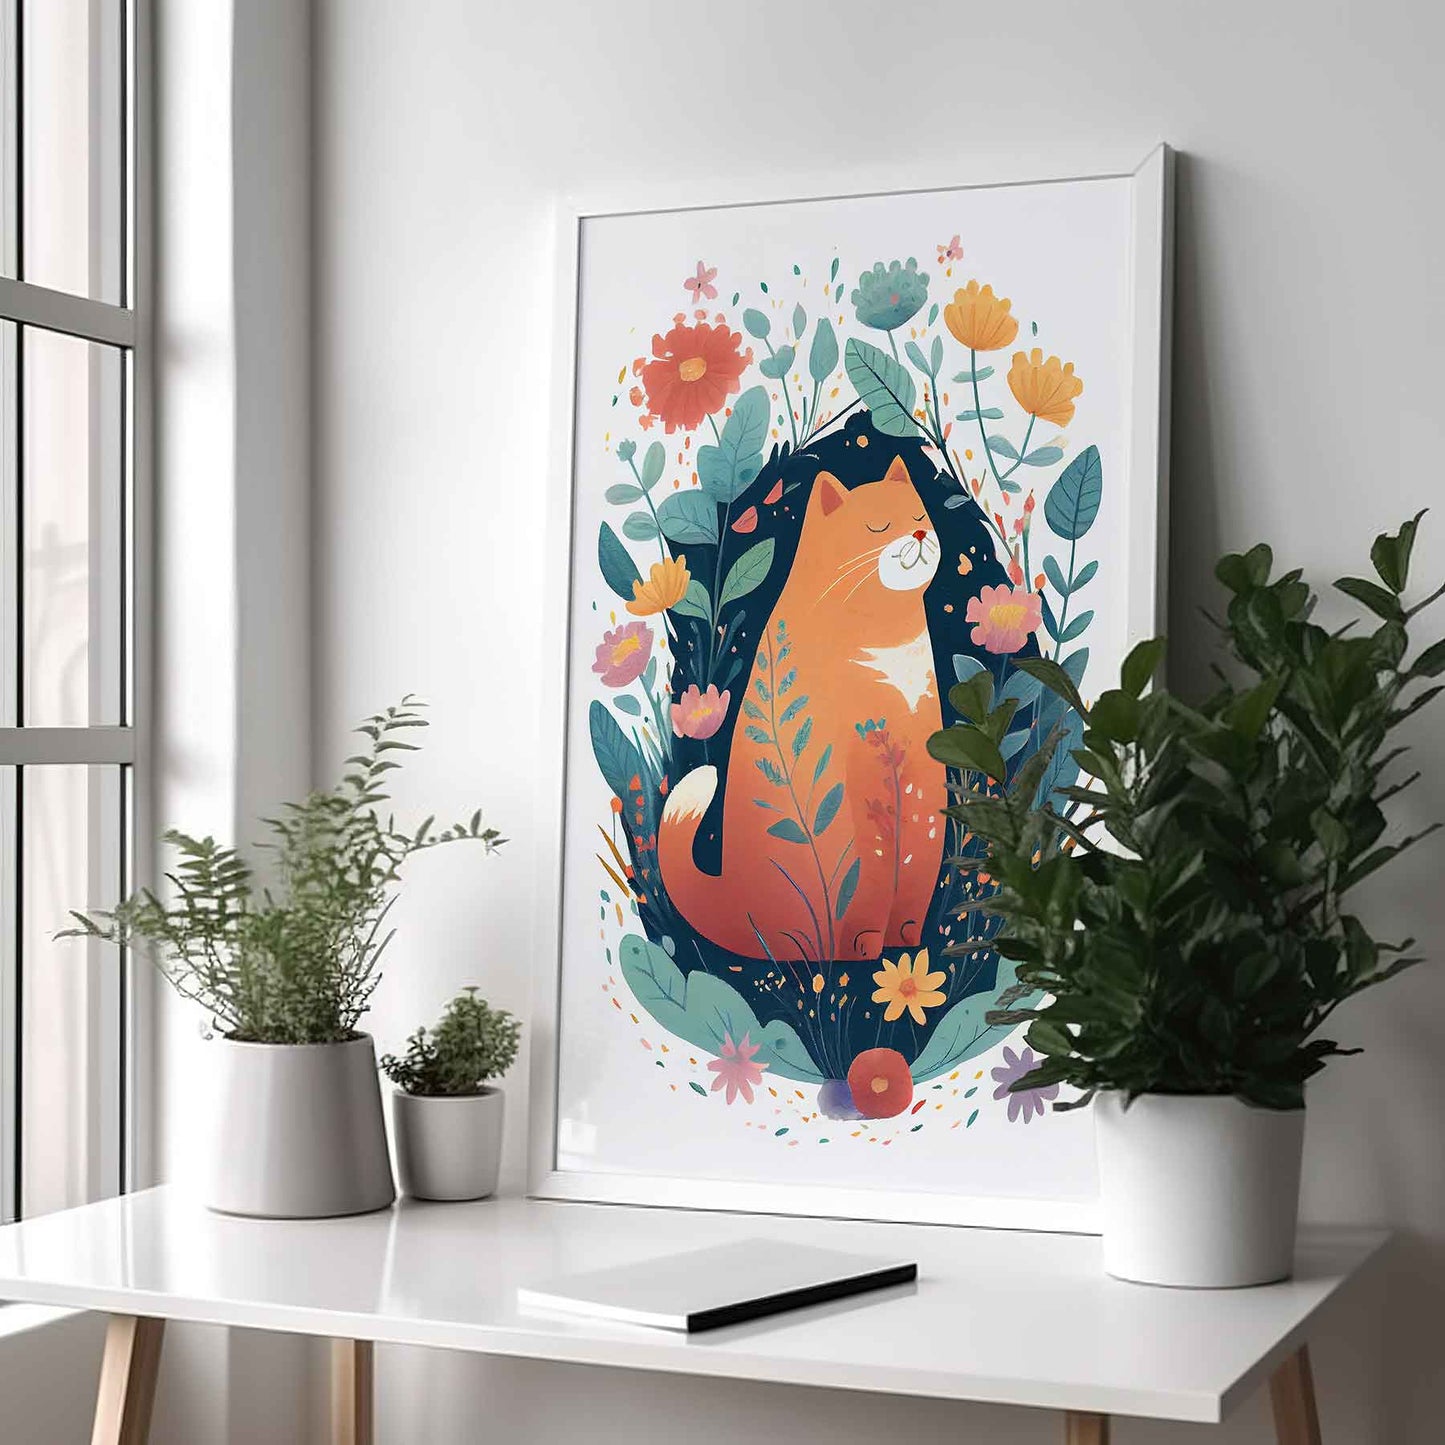 Framed Image of Cute Ginger Cat With Flowers Wall Art Poster Print